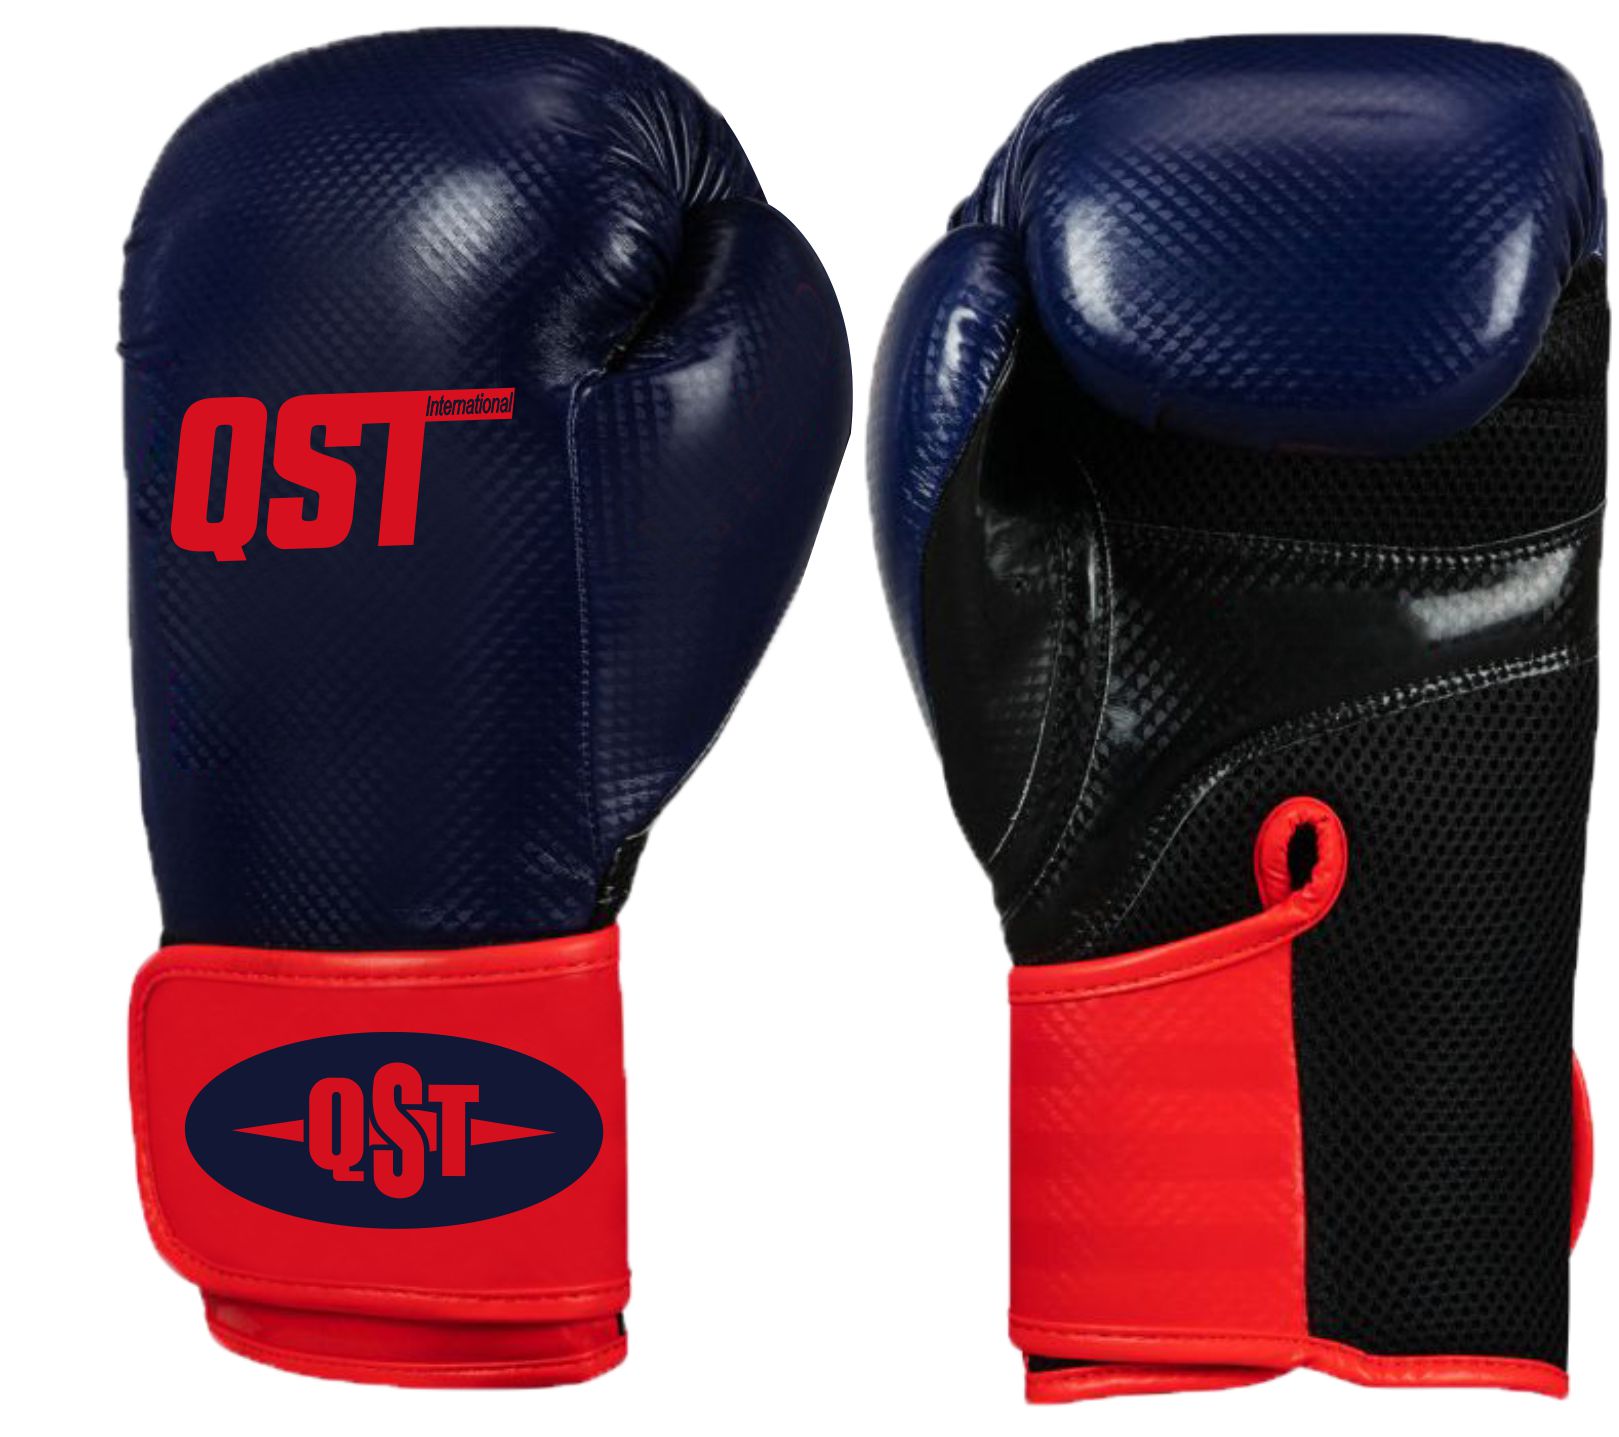 Professional Boxing Gloves - PRG-1518